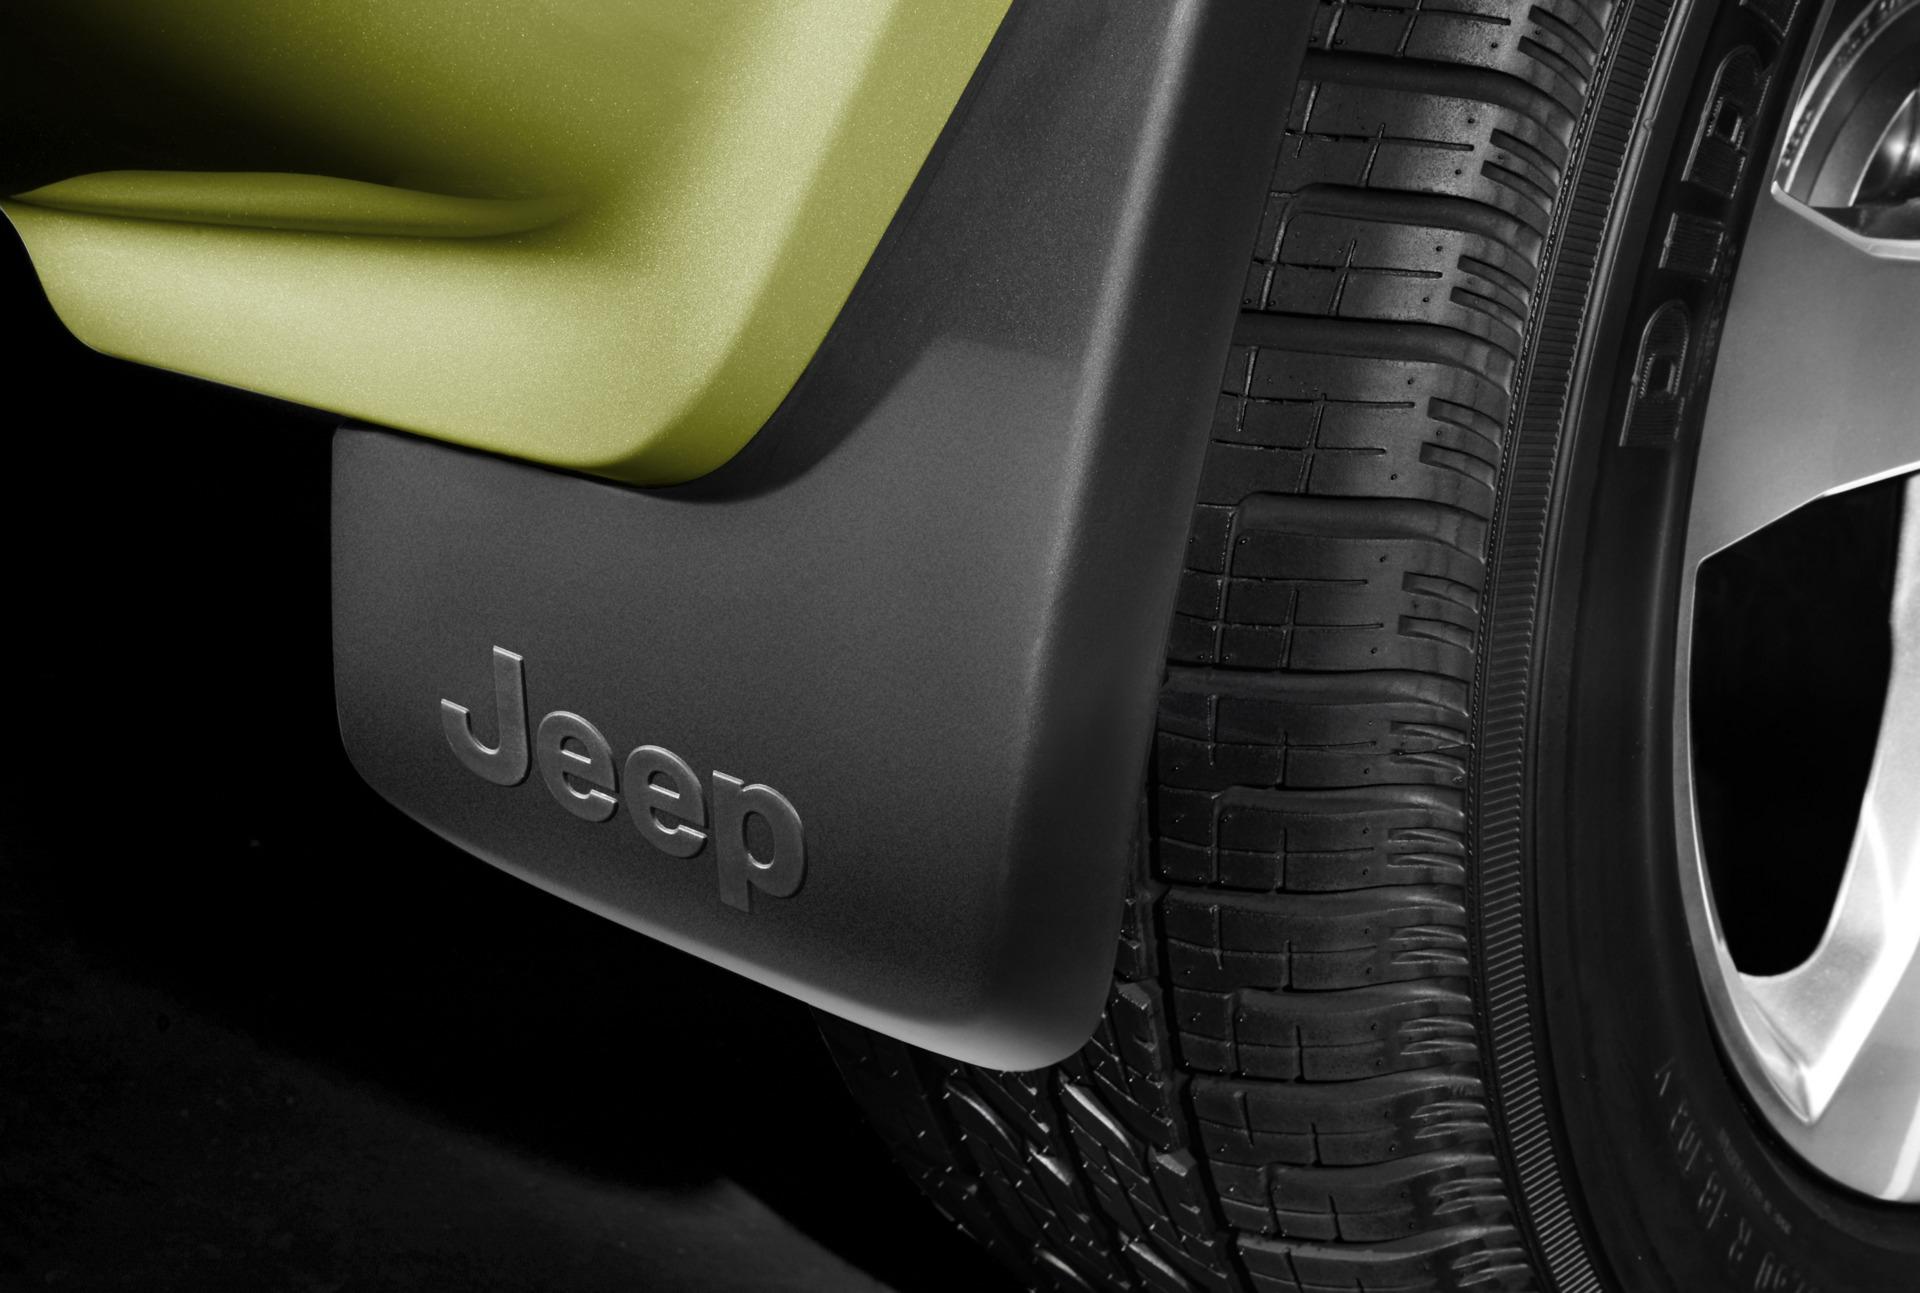 2009 Jeep Patriot Back Country Concept